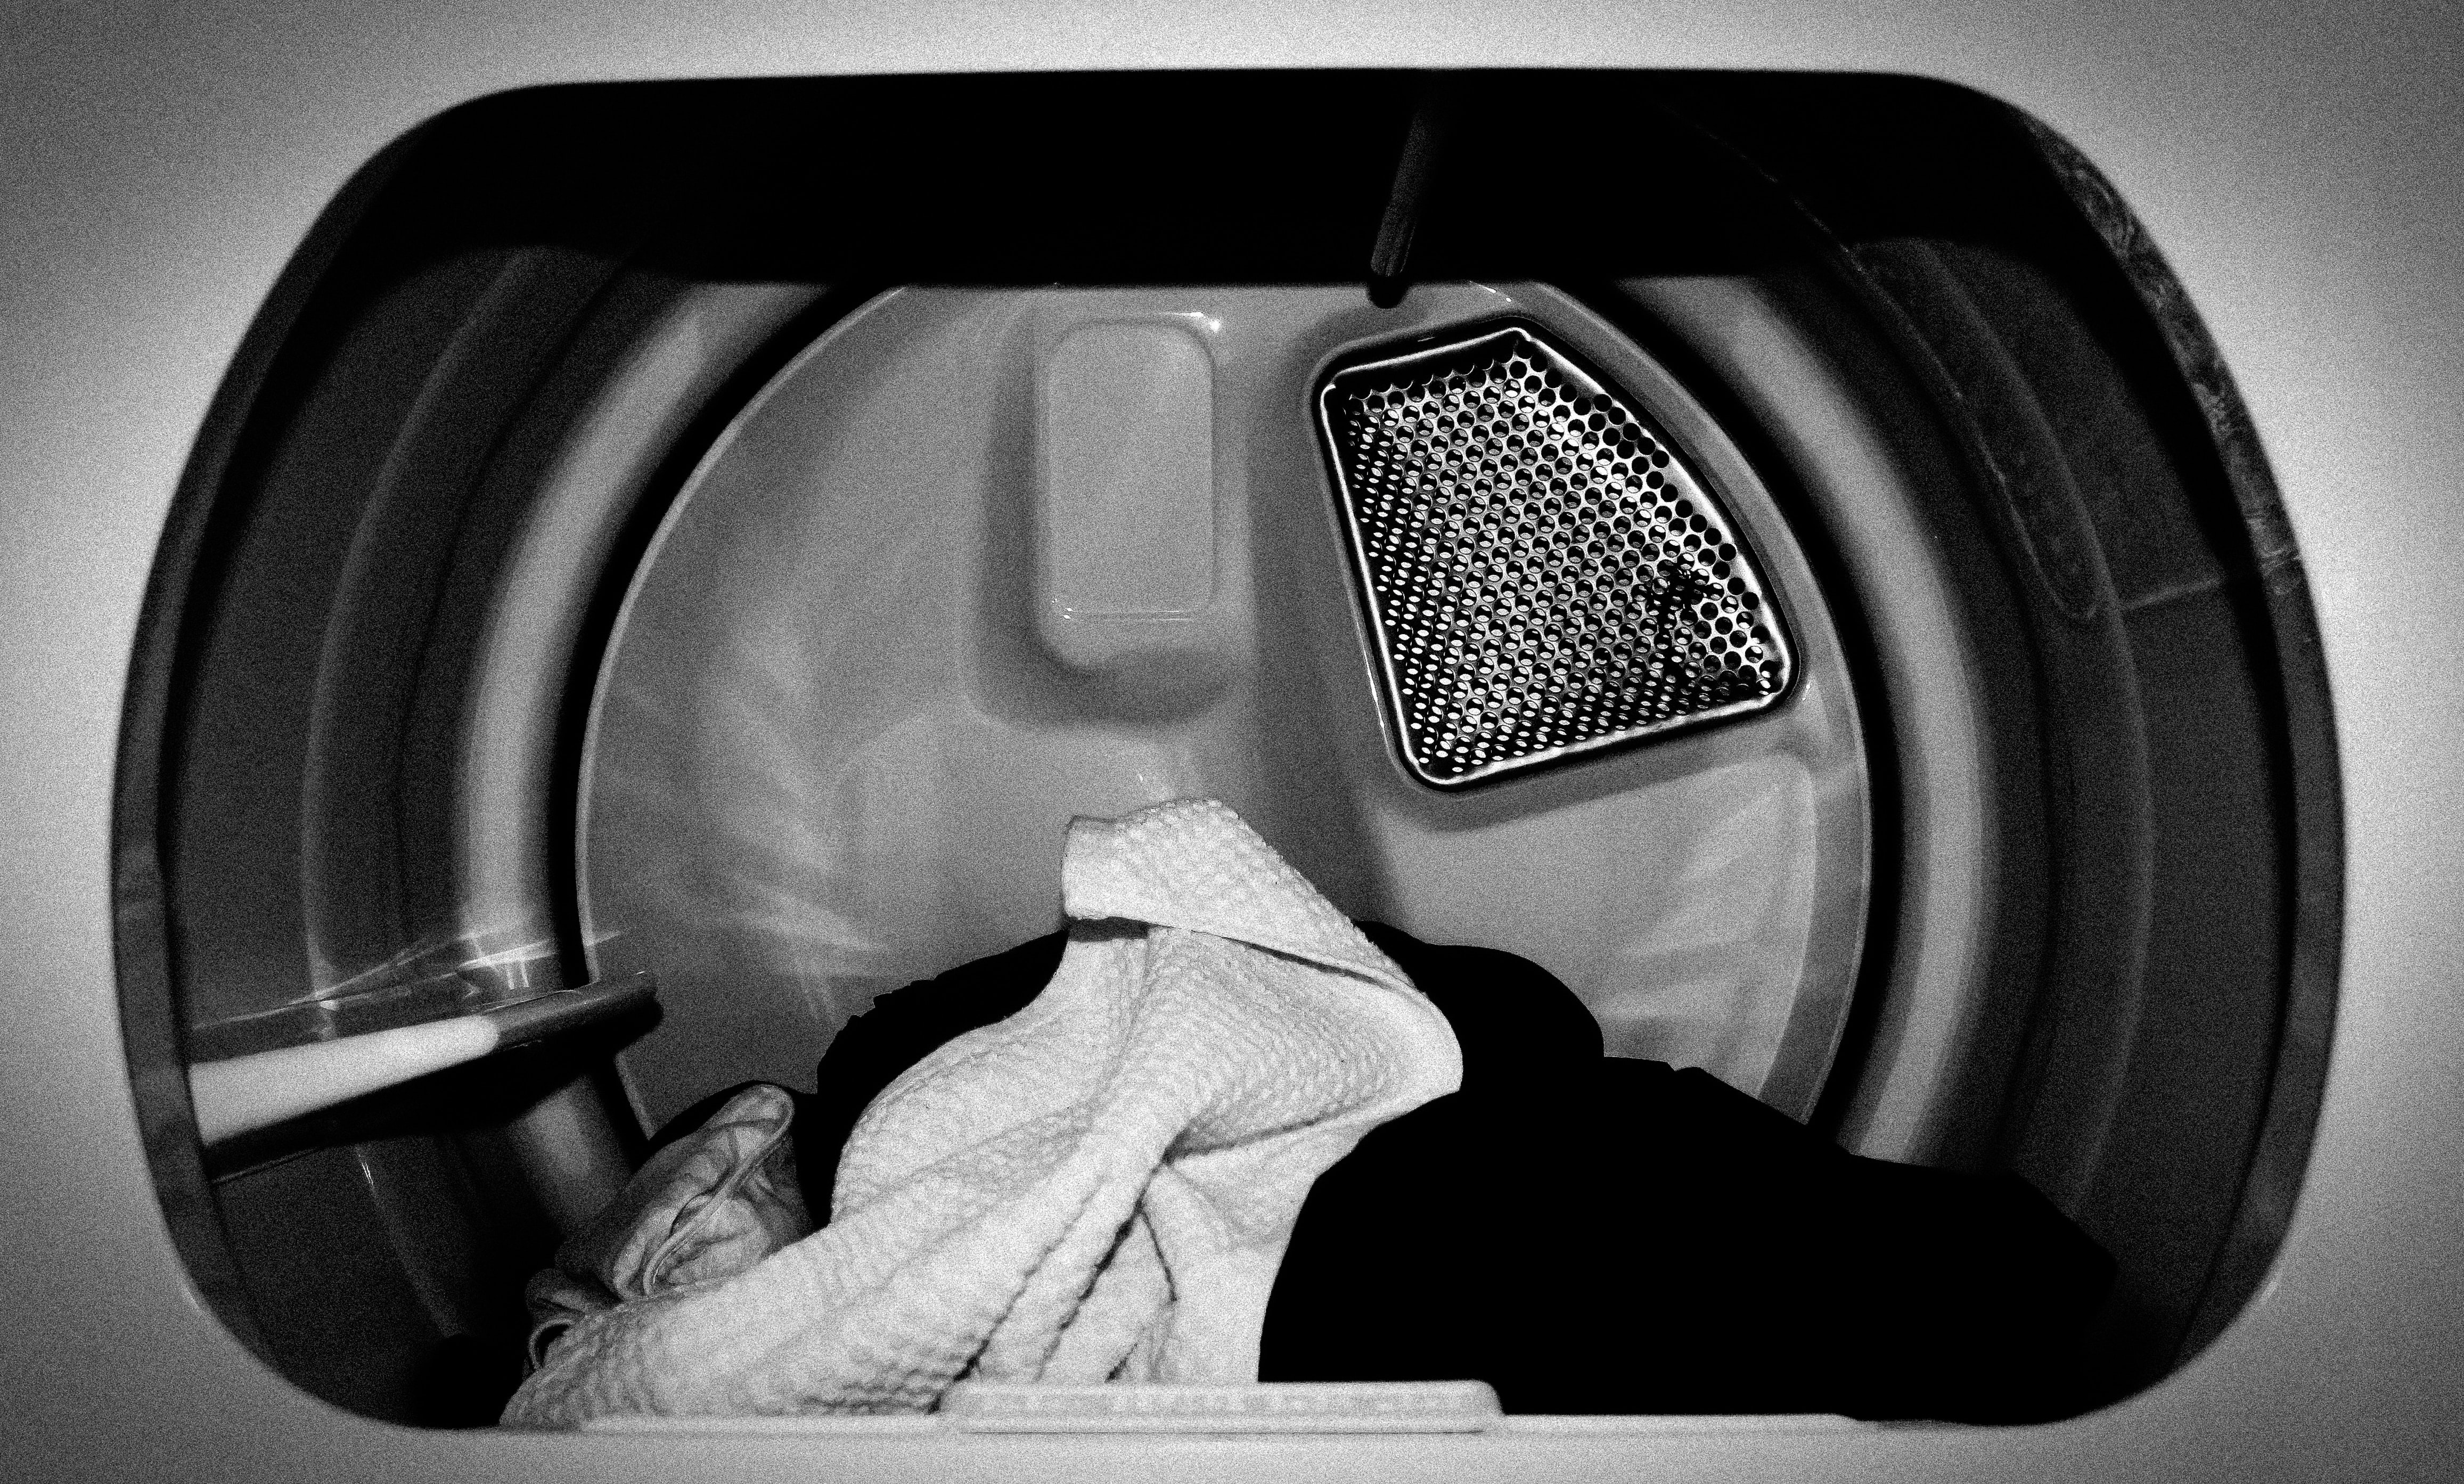 Black and white close-up view of clothes dryer's interior with clothing inside